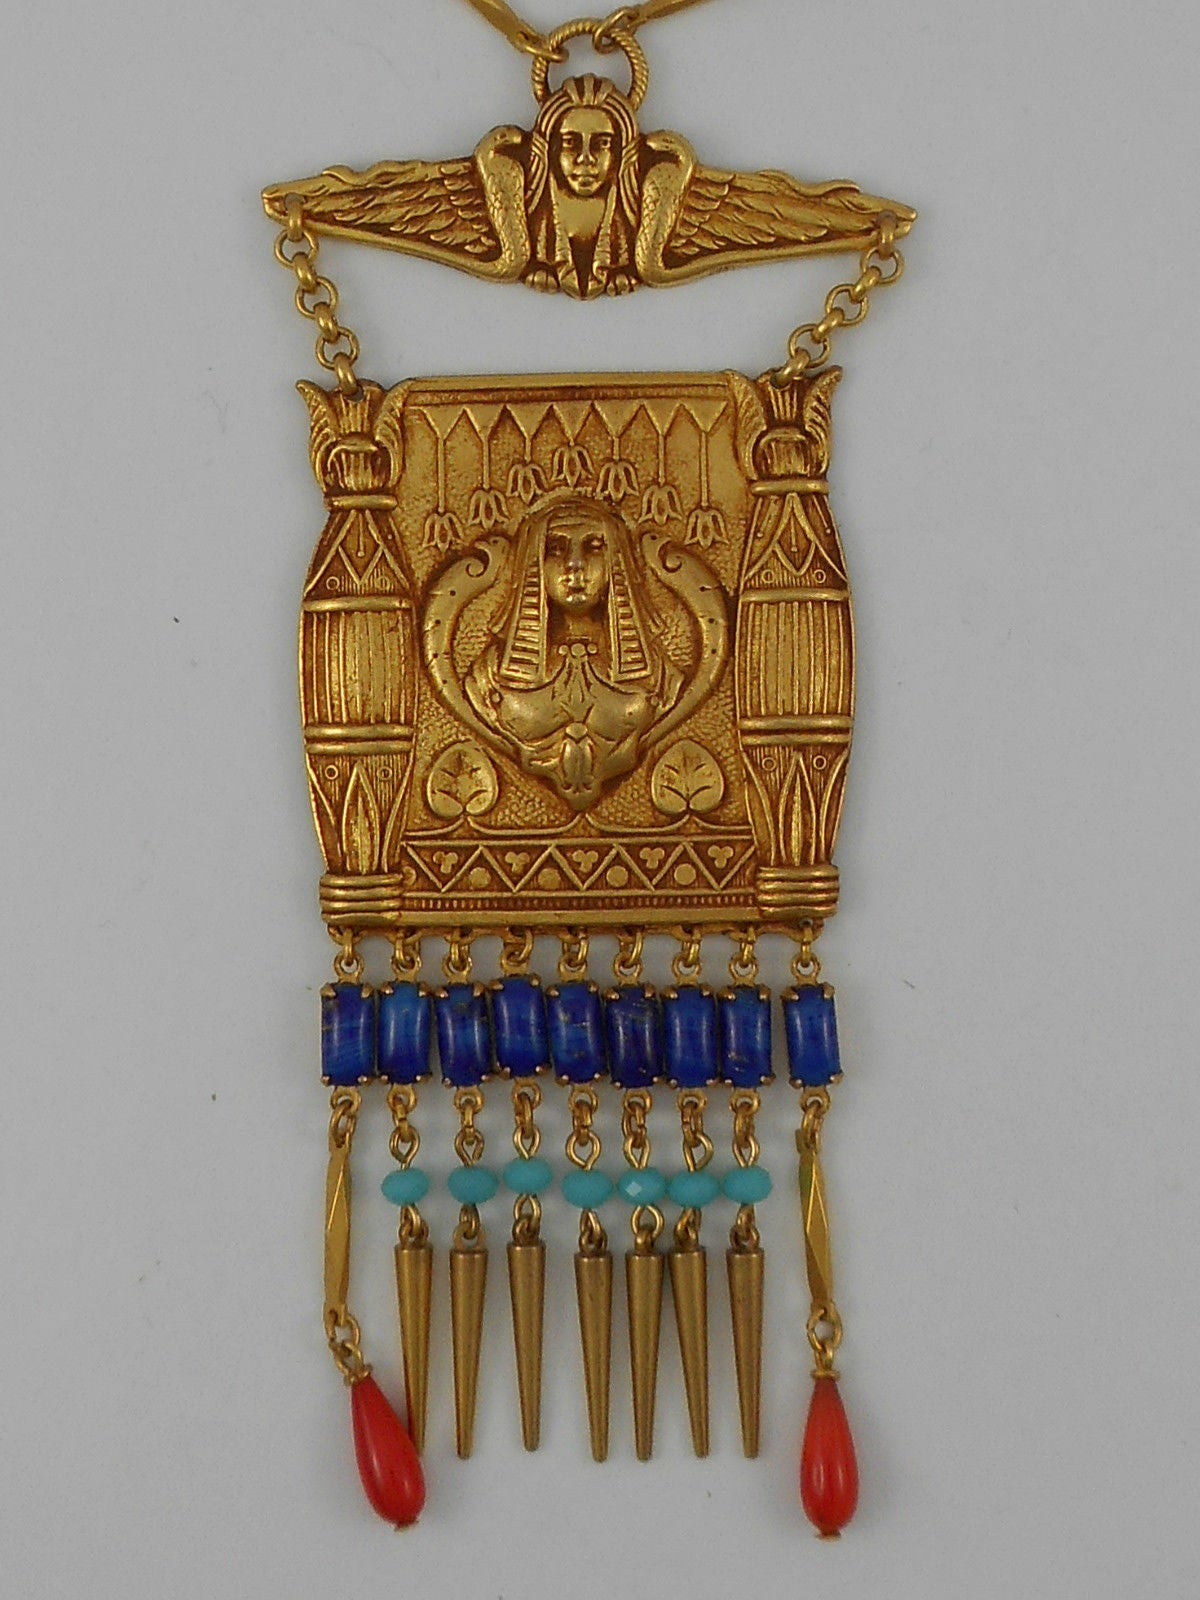 Featuring Askew London Cleopatra and Pillar Designs Rectangular Statement Pendant Necklace; Antiqued Gilt Brass with Fringe Of Blue Glass Baguettes, Faux Turquoise Cushion faceted Beads and Coral Drops. Pendant is suspended from smaller bar and a